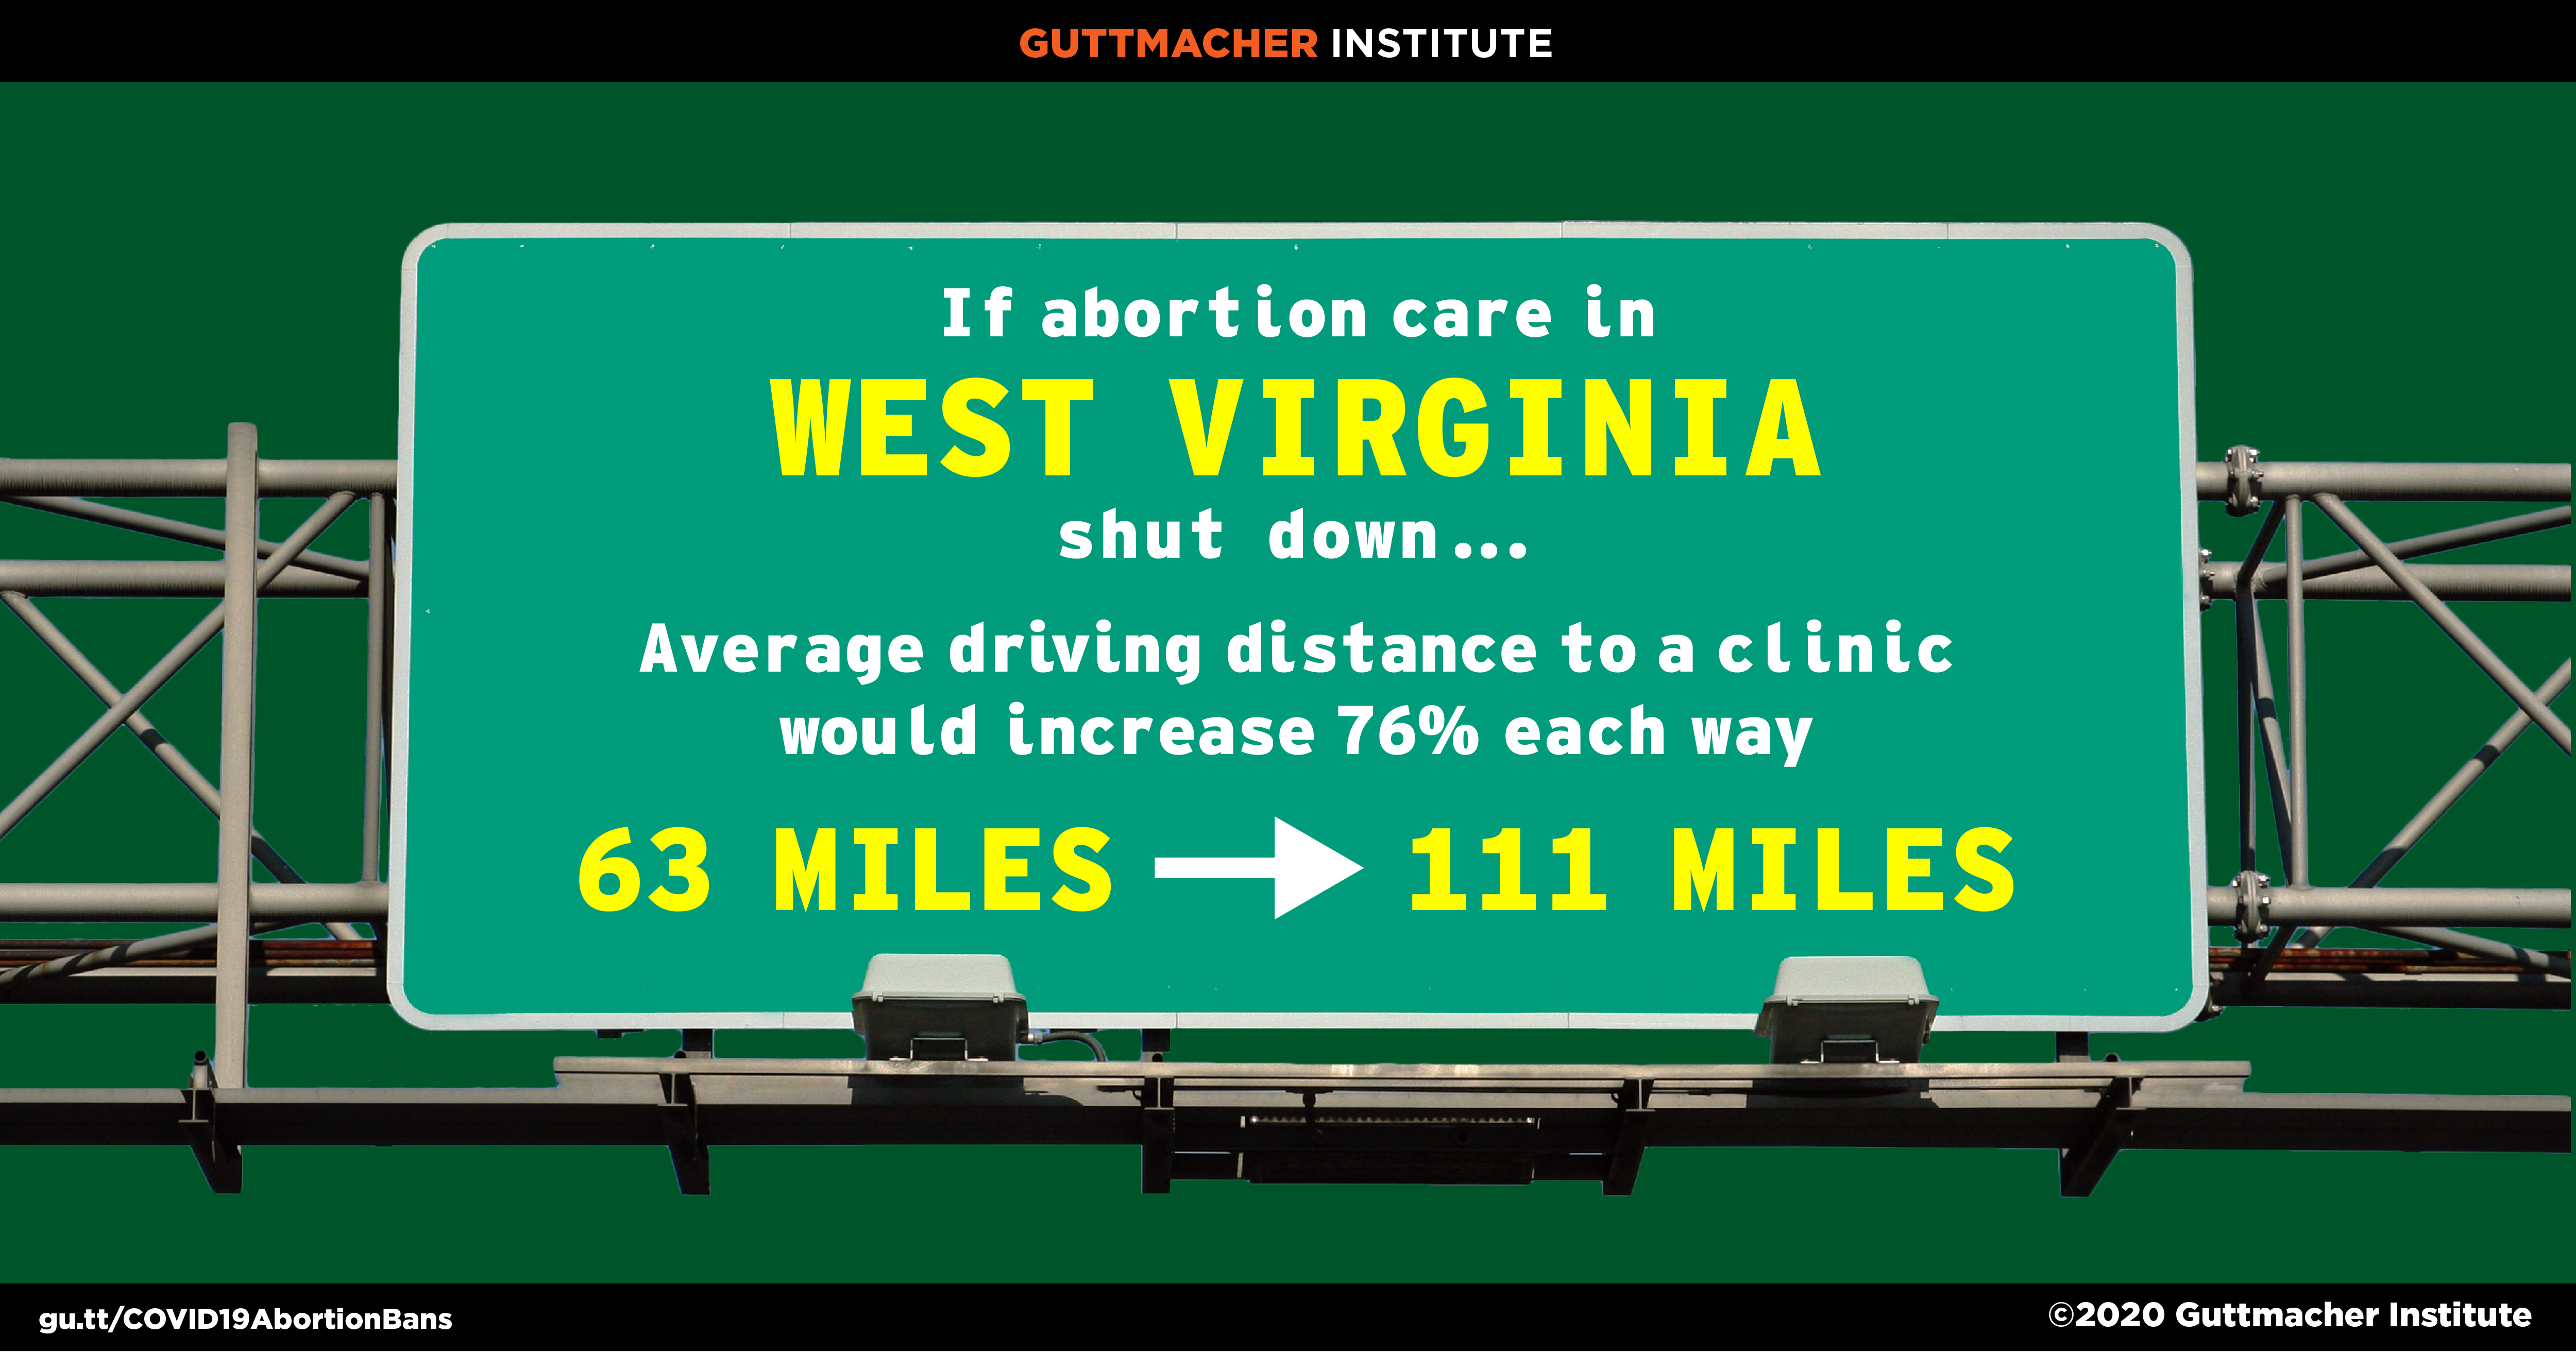 If abortion care in West Virginia shut down, the average driving distance to a clinic would increase 76% each way from 63 miles to 111 miles